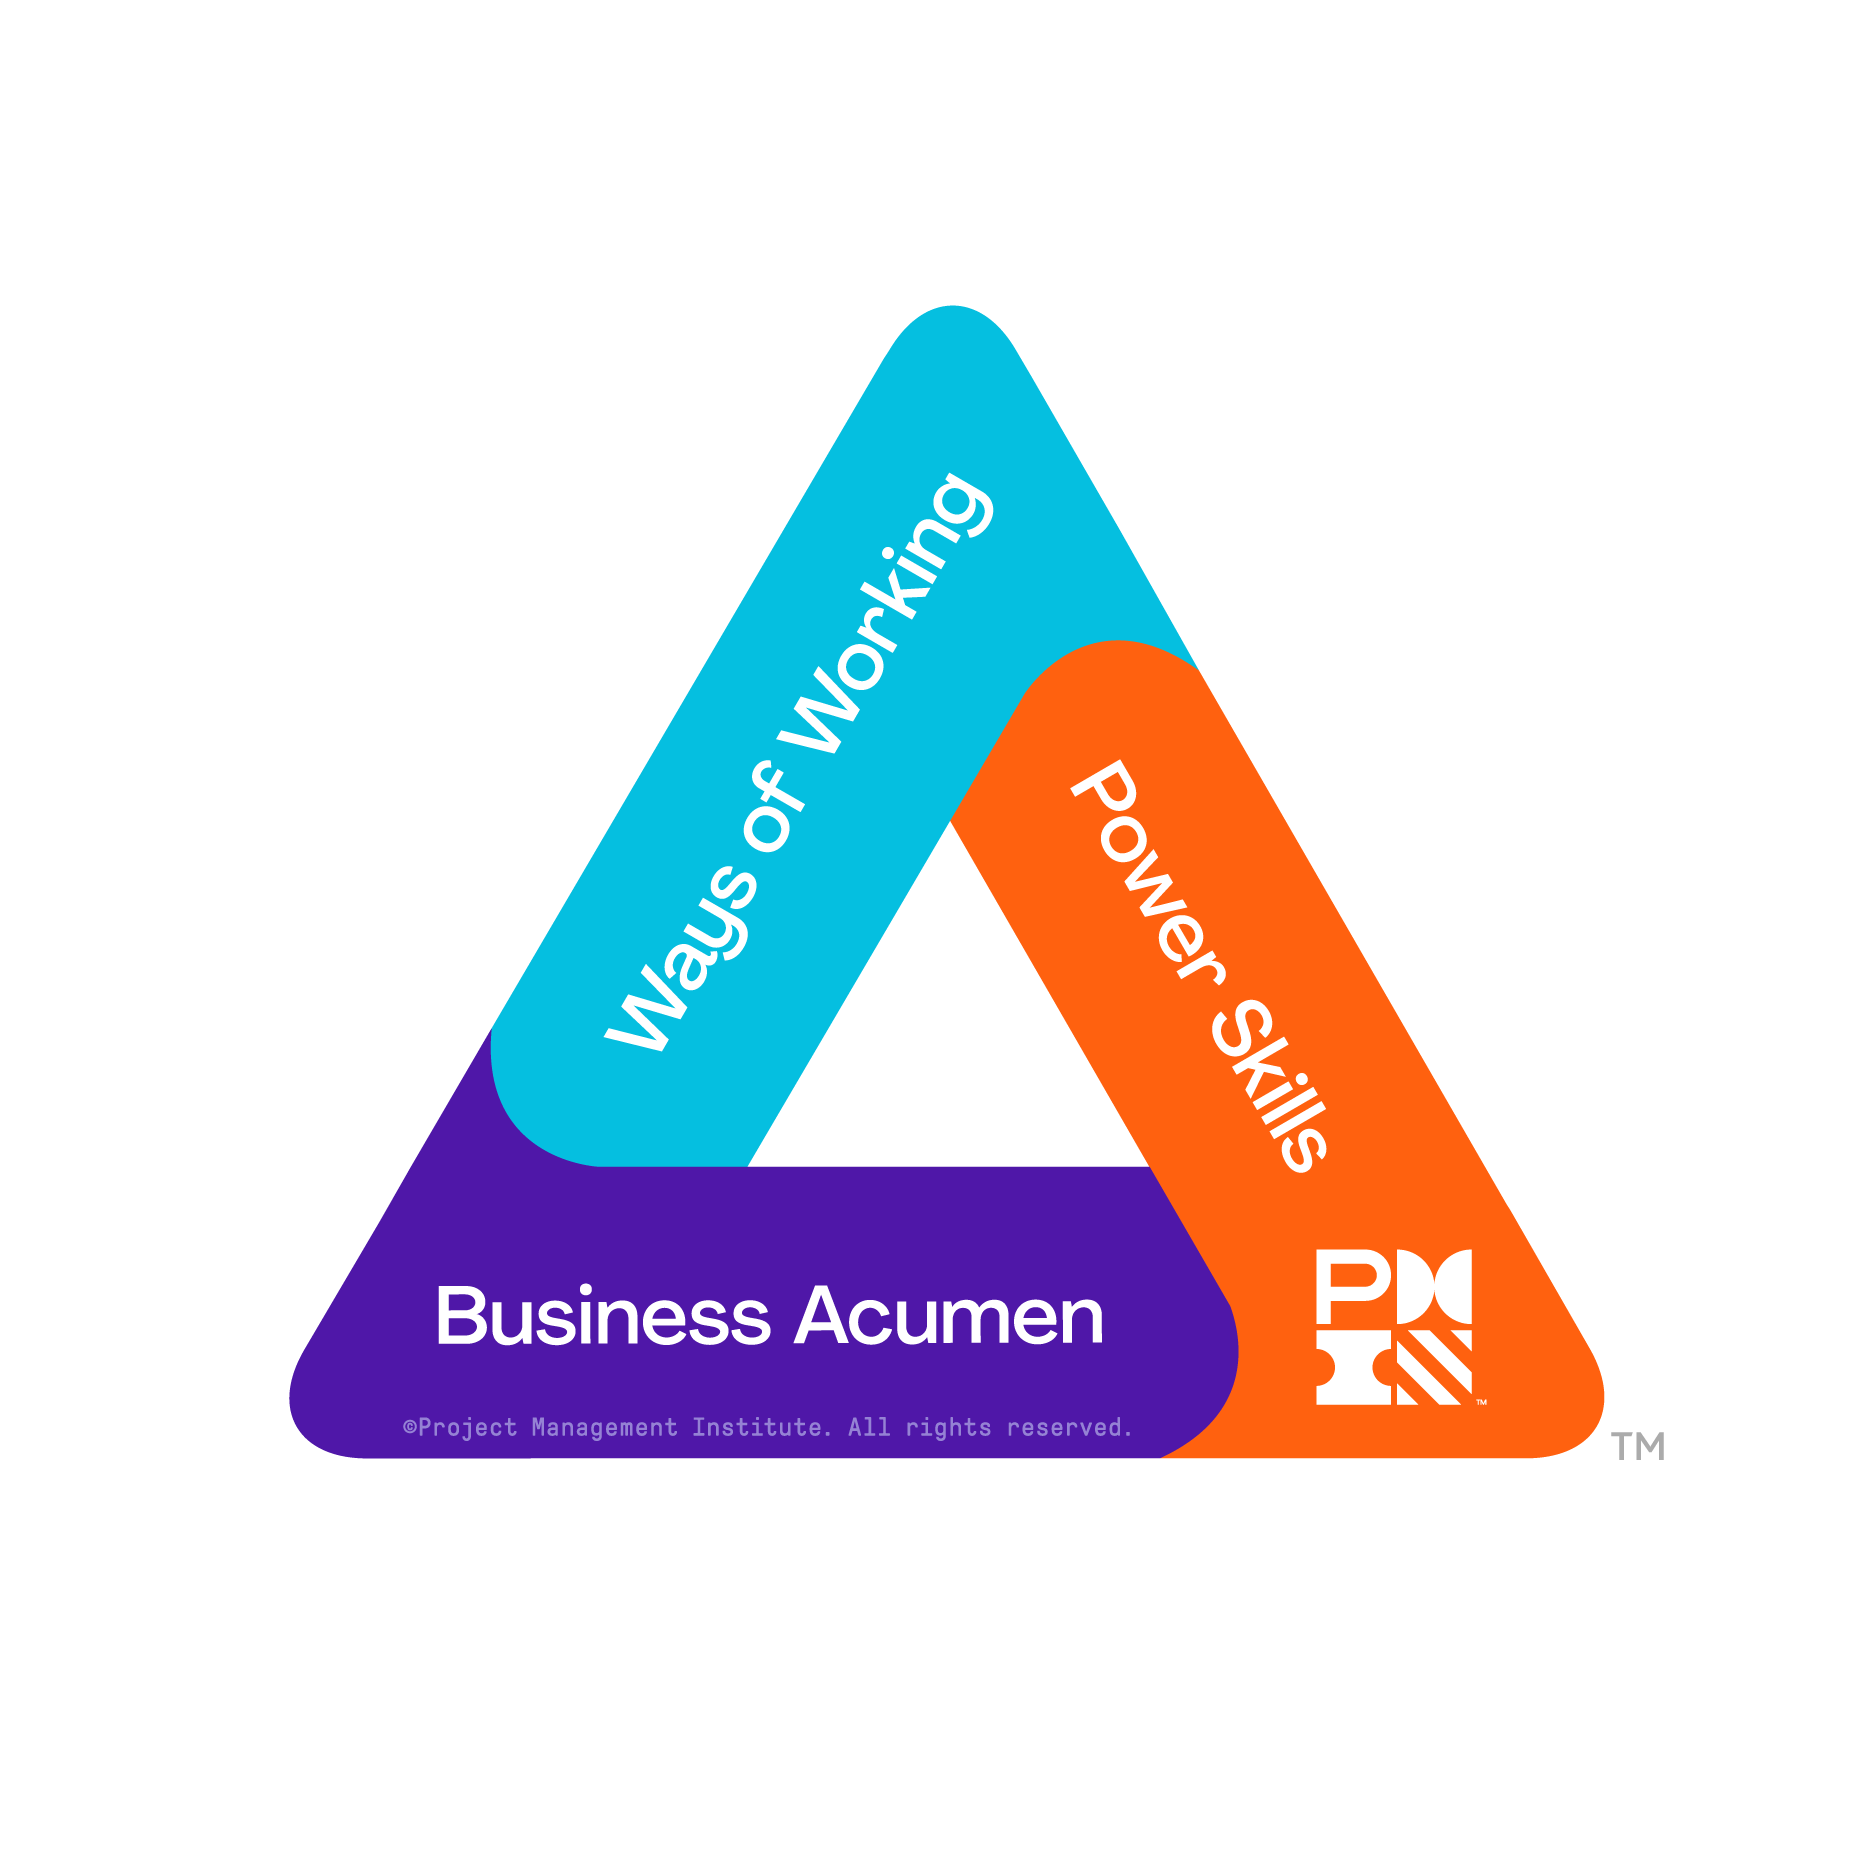 How to earn 60 PDUs under PMI's new Talent Triangle.